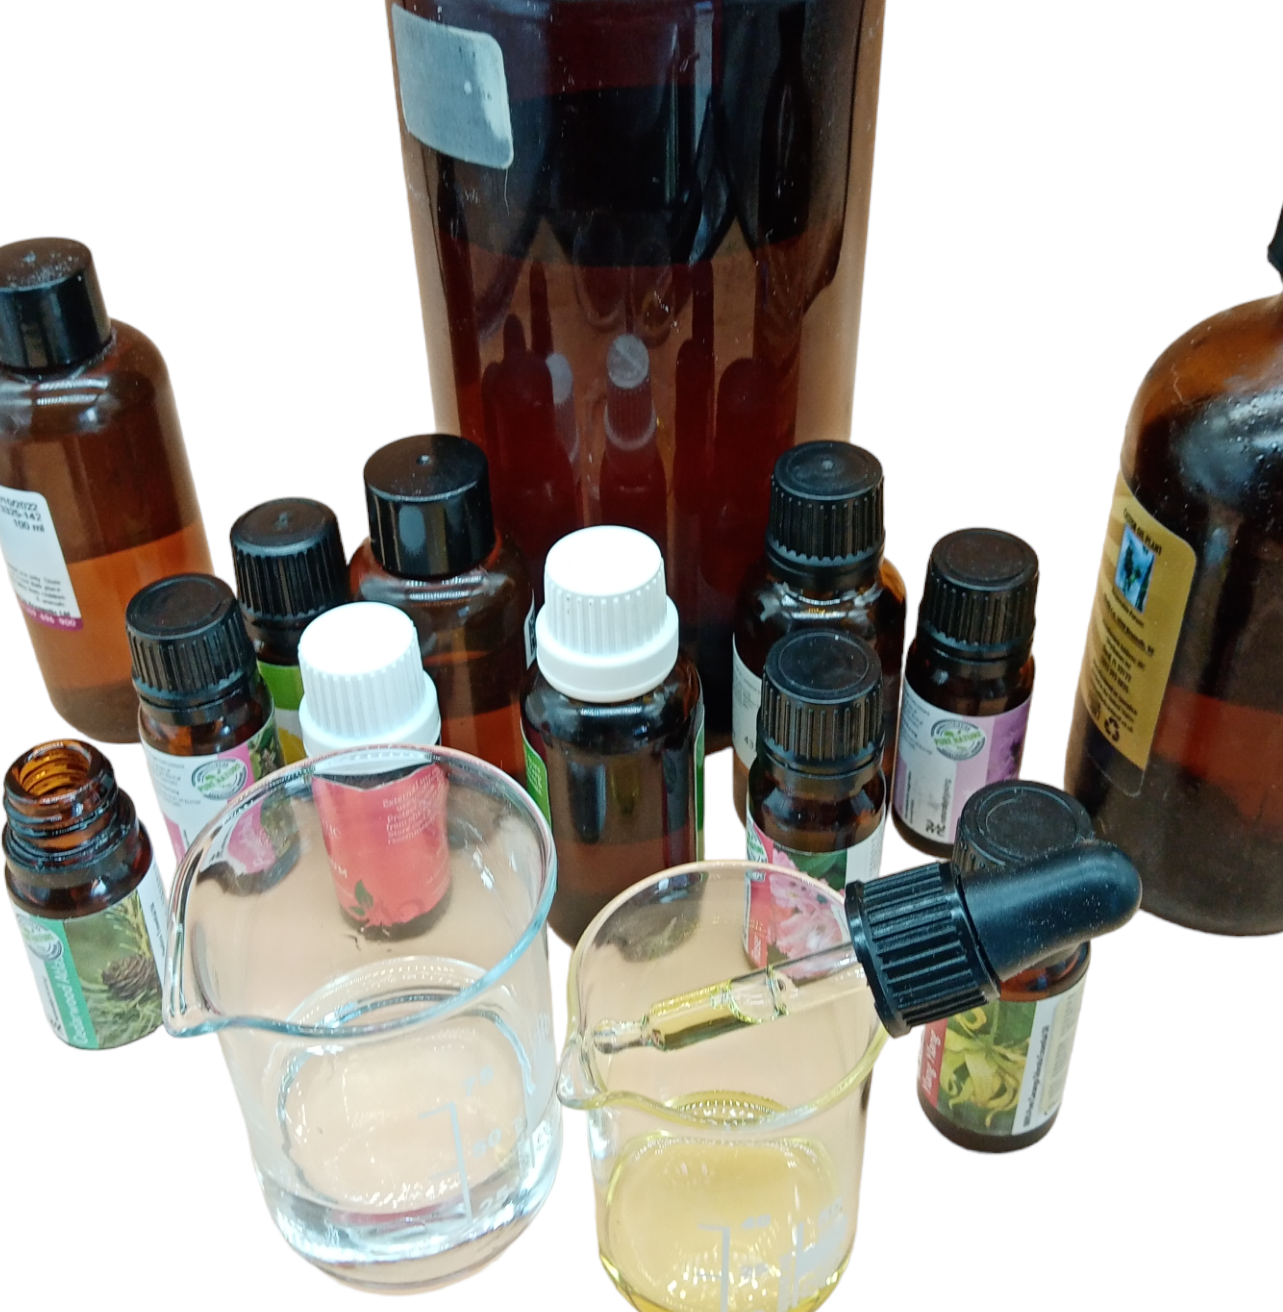 "Scented Wellness: Crafting Natural Essential Oil Perfumes for Holistic Aromatherapy"